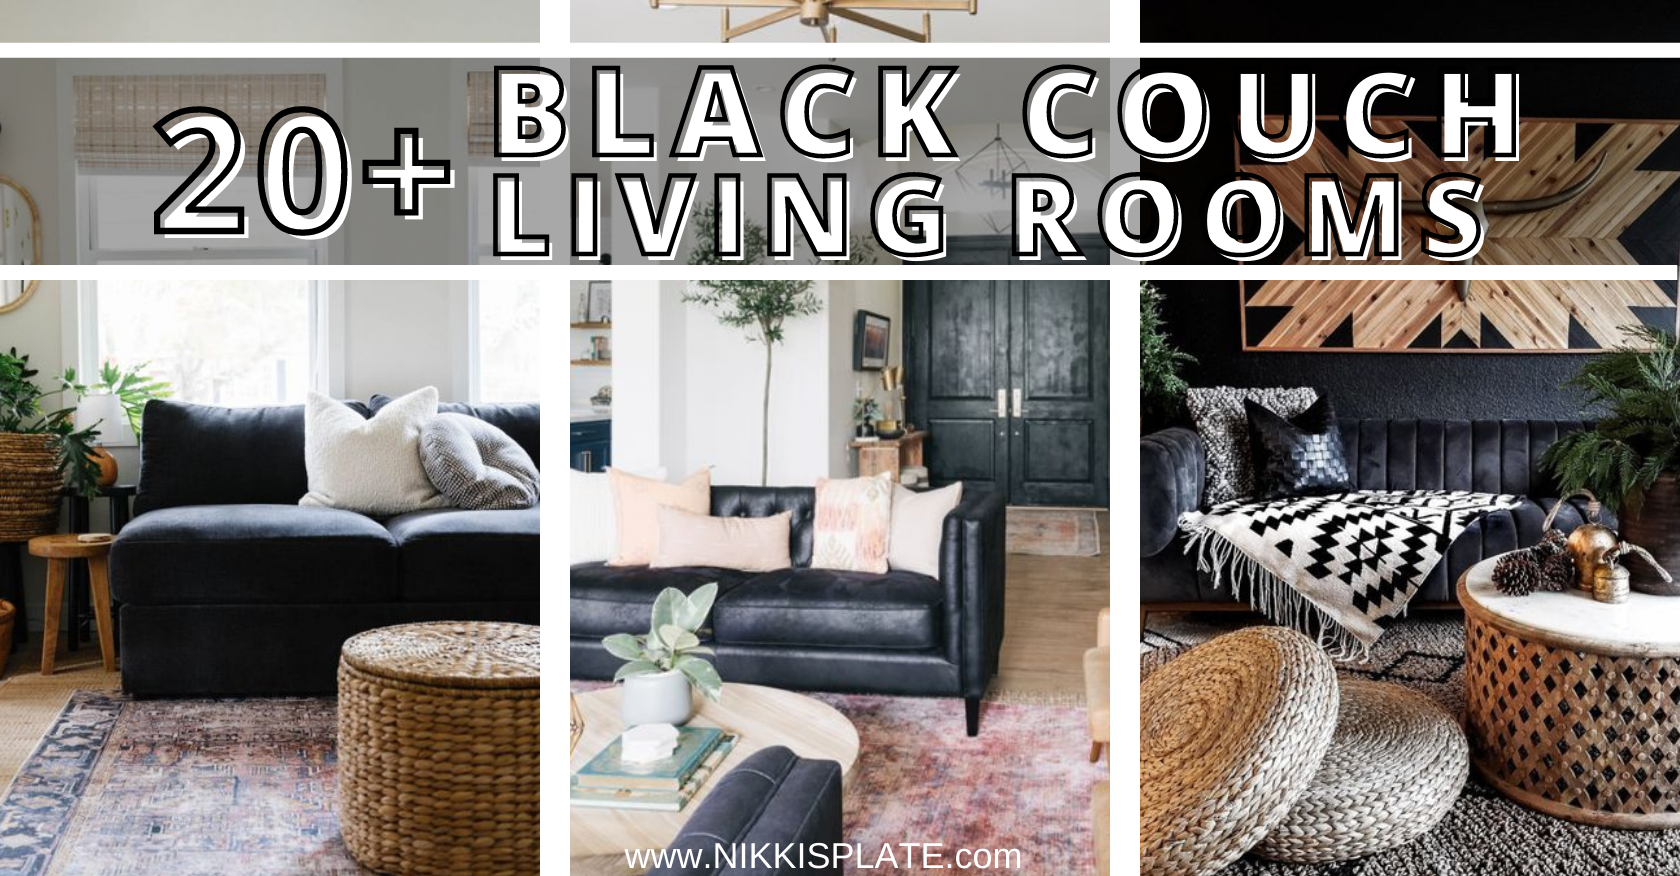 20 Beautiful Black Couch Living Room Ideas - Nikki's Plate